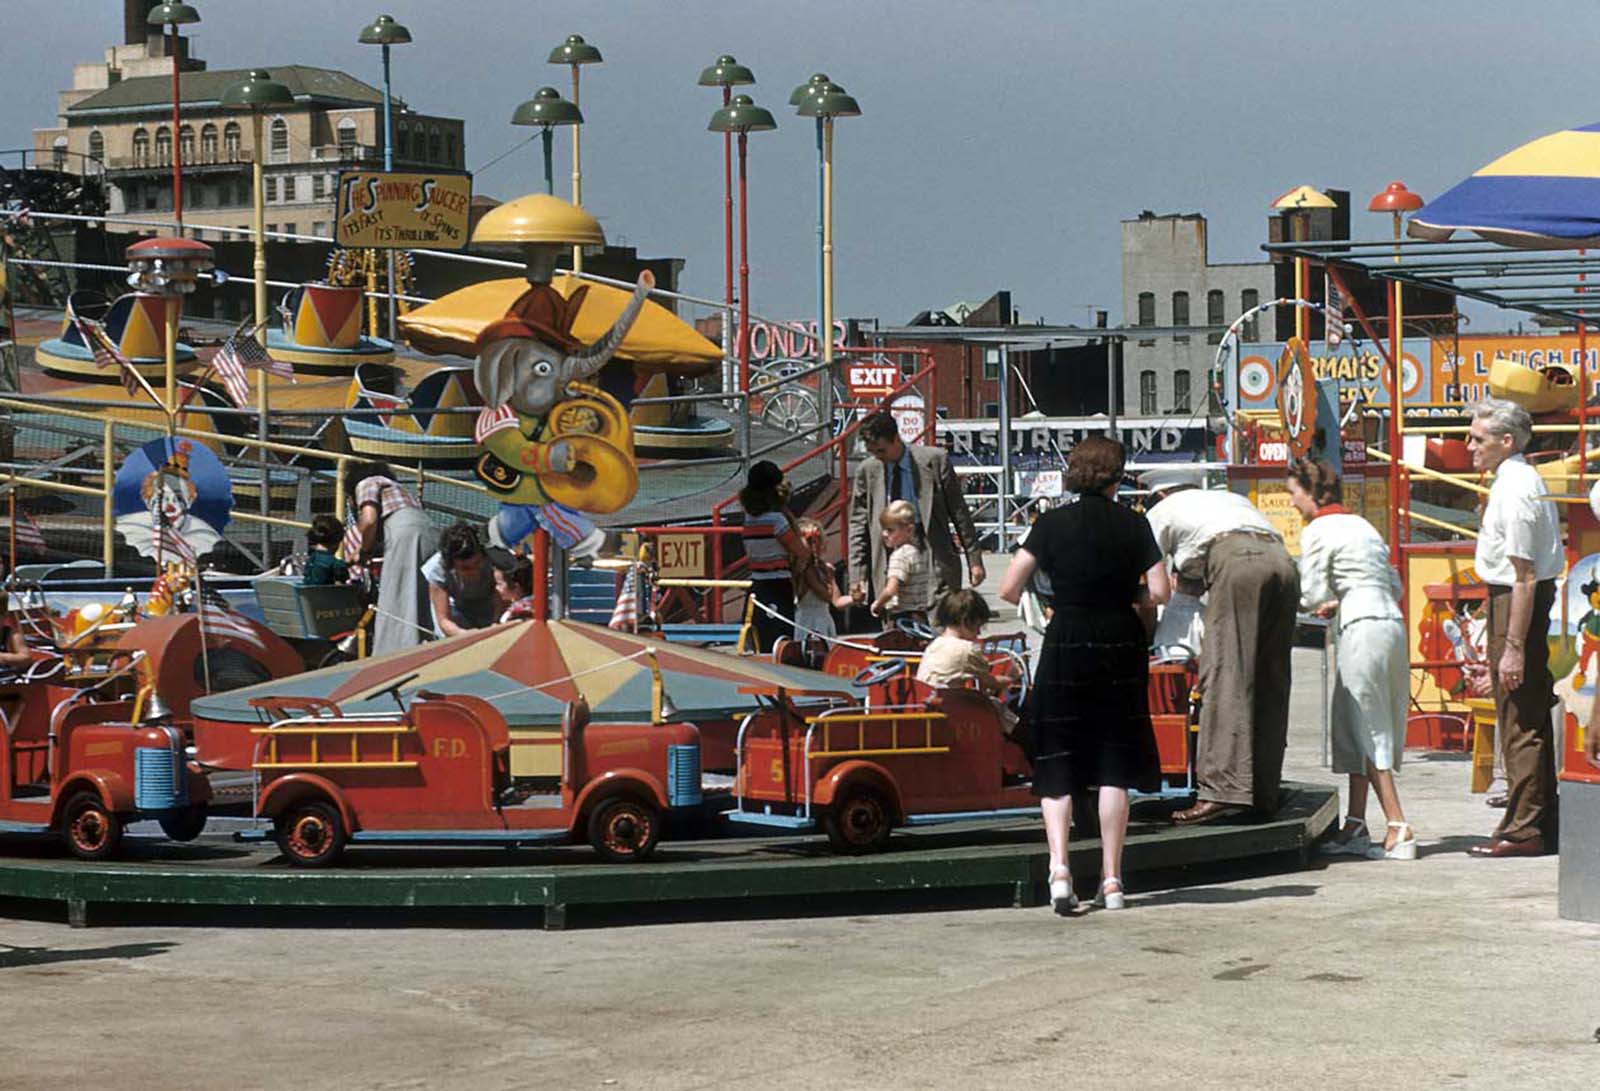 The Spinning saucer and other rides at Coney Island.